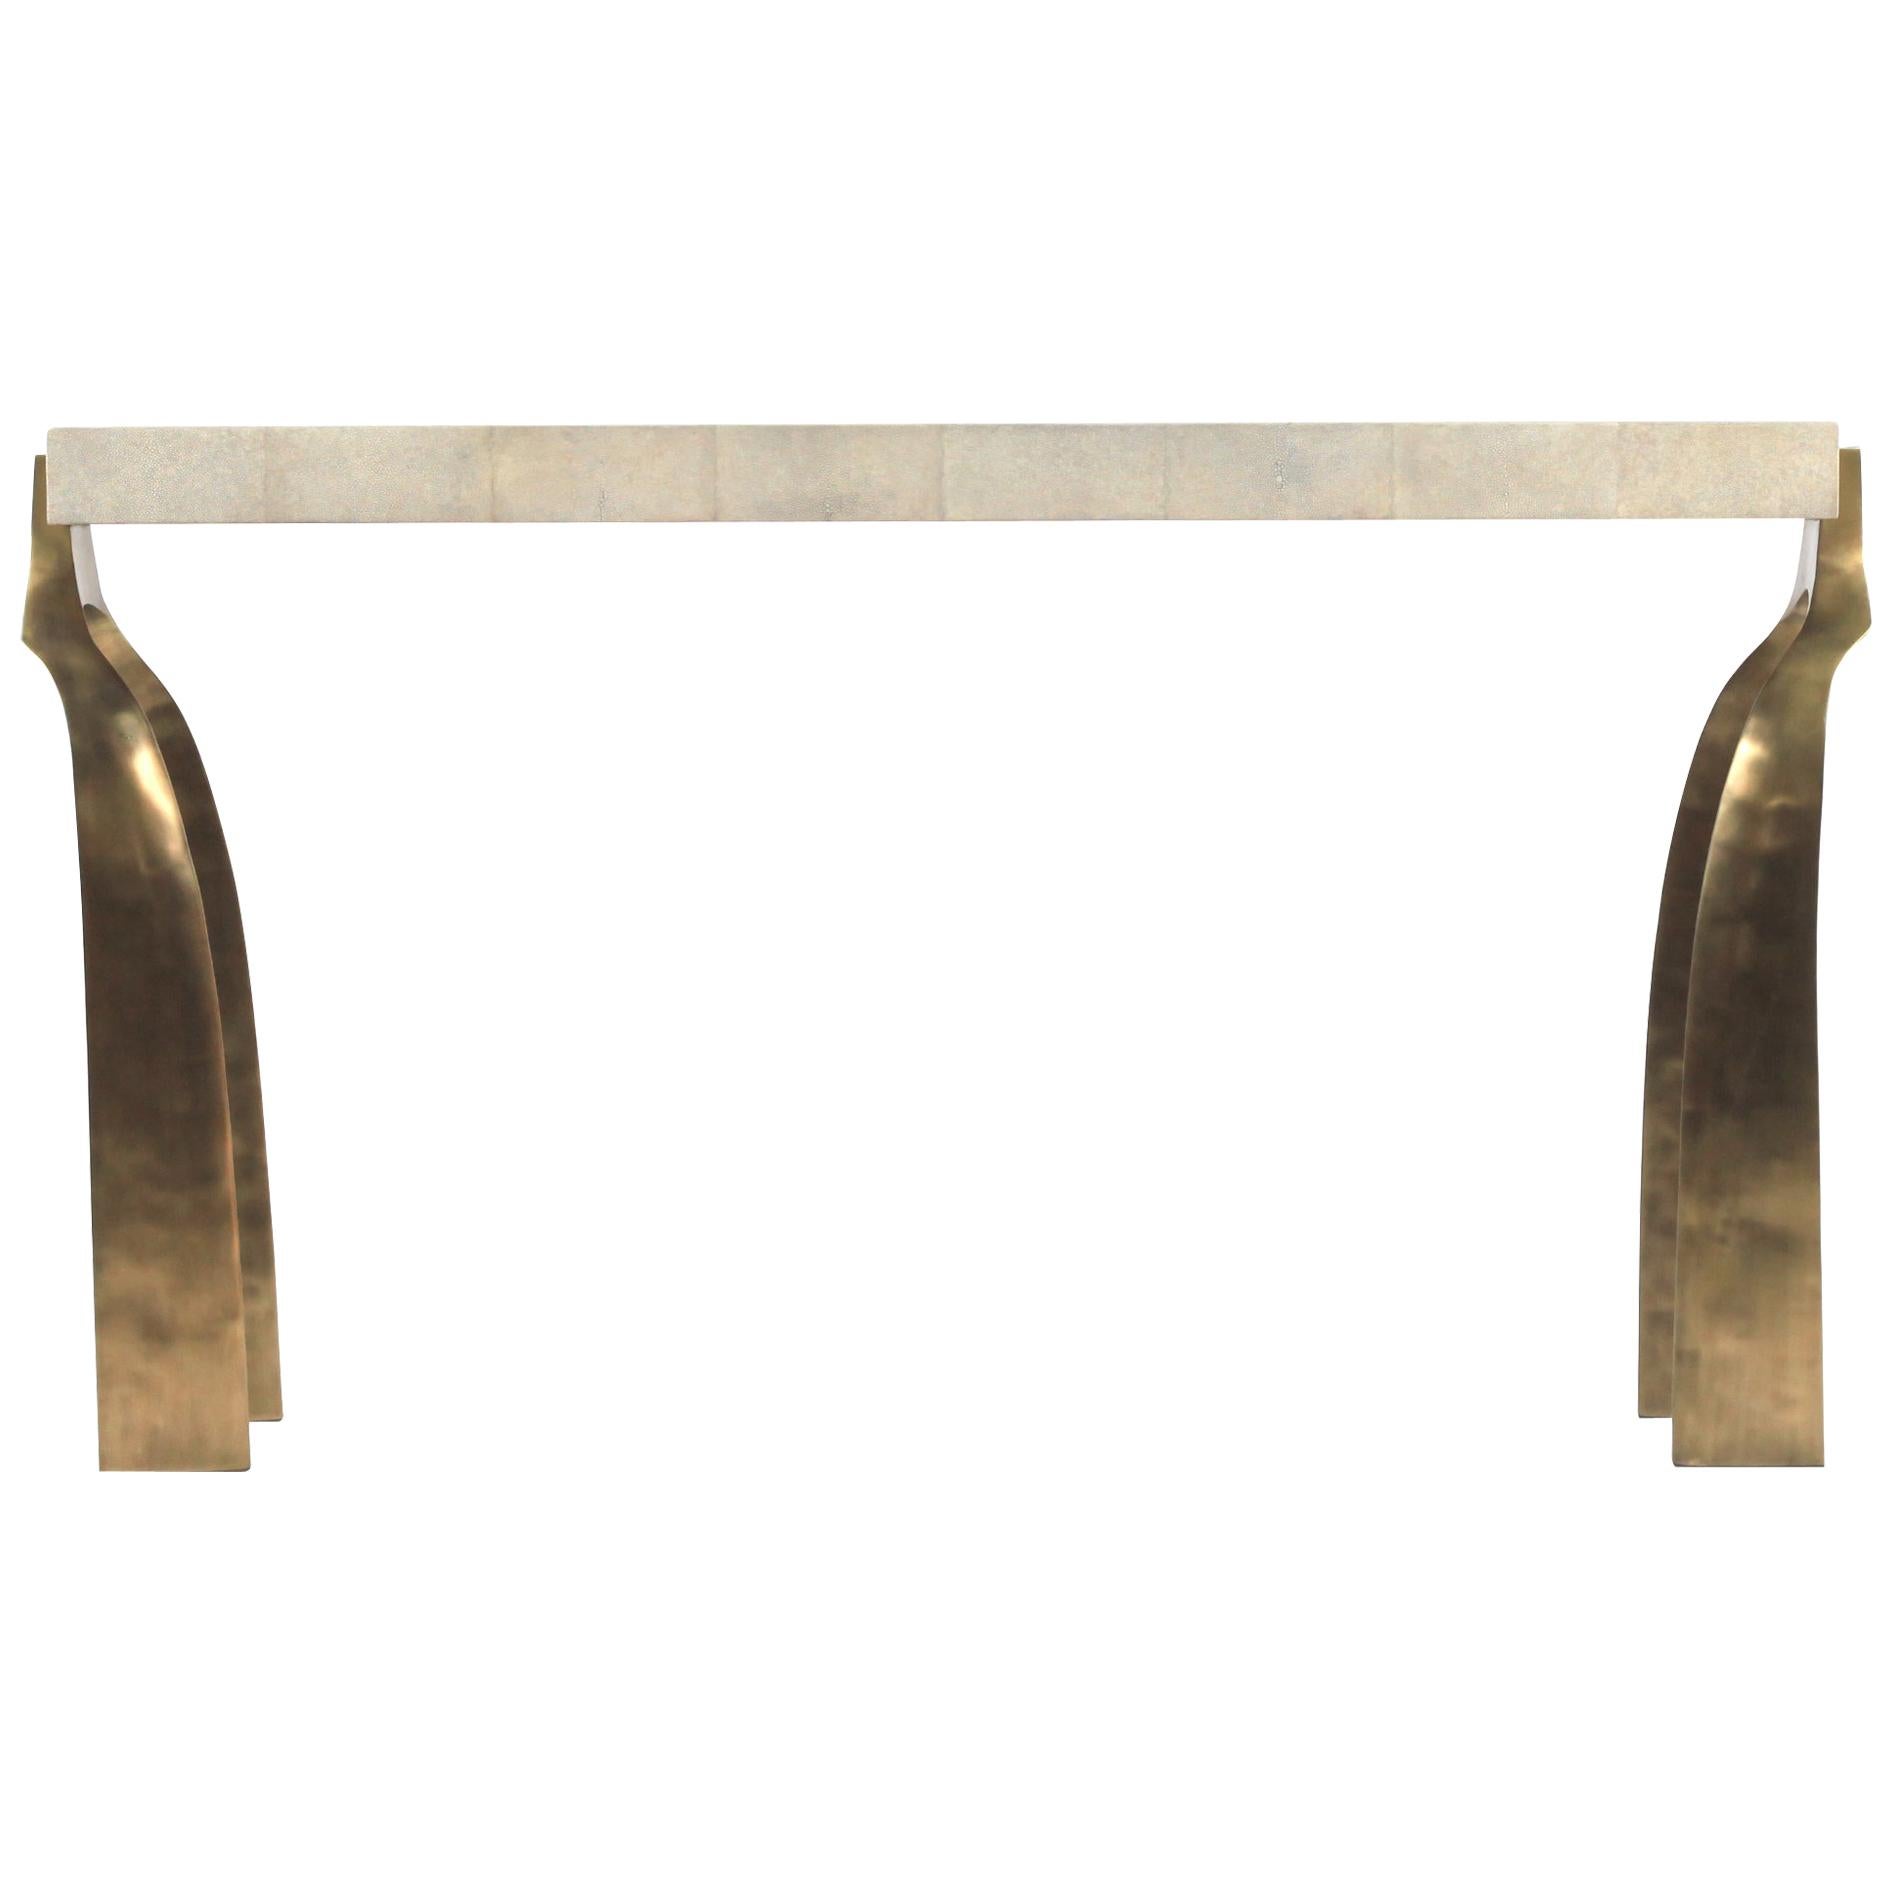 The Galaxy console table is both dramatic and organic it’s unique design. The cream shagreen inlaid top sits on a pair of ethereal and sculptural bronze-patina brass legs. This console table also comes in a writing desk version, see image at end of